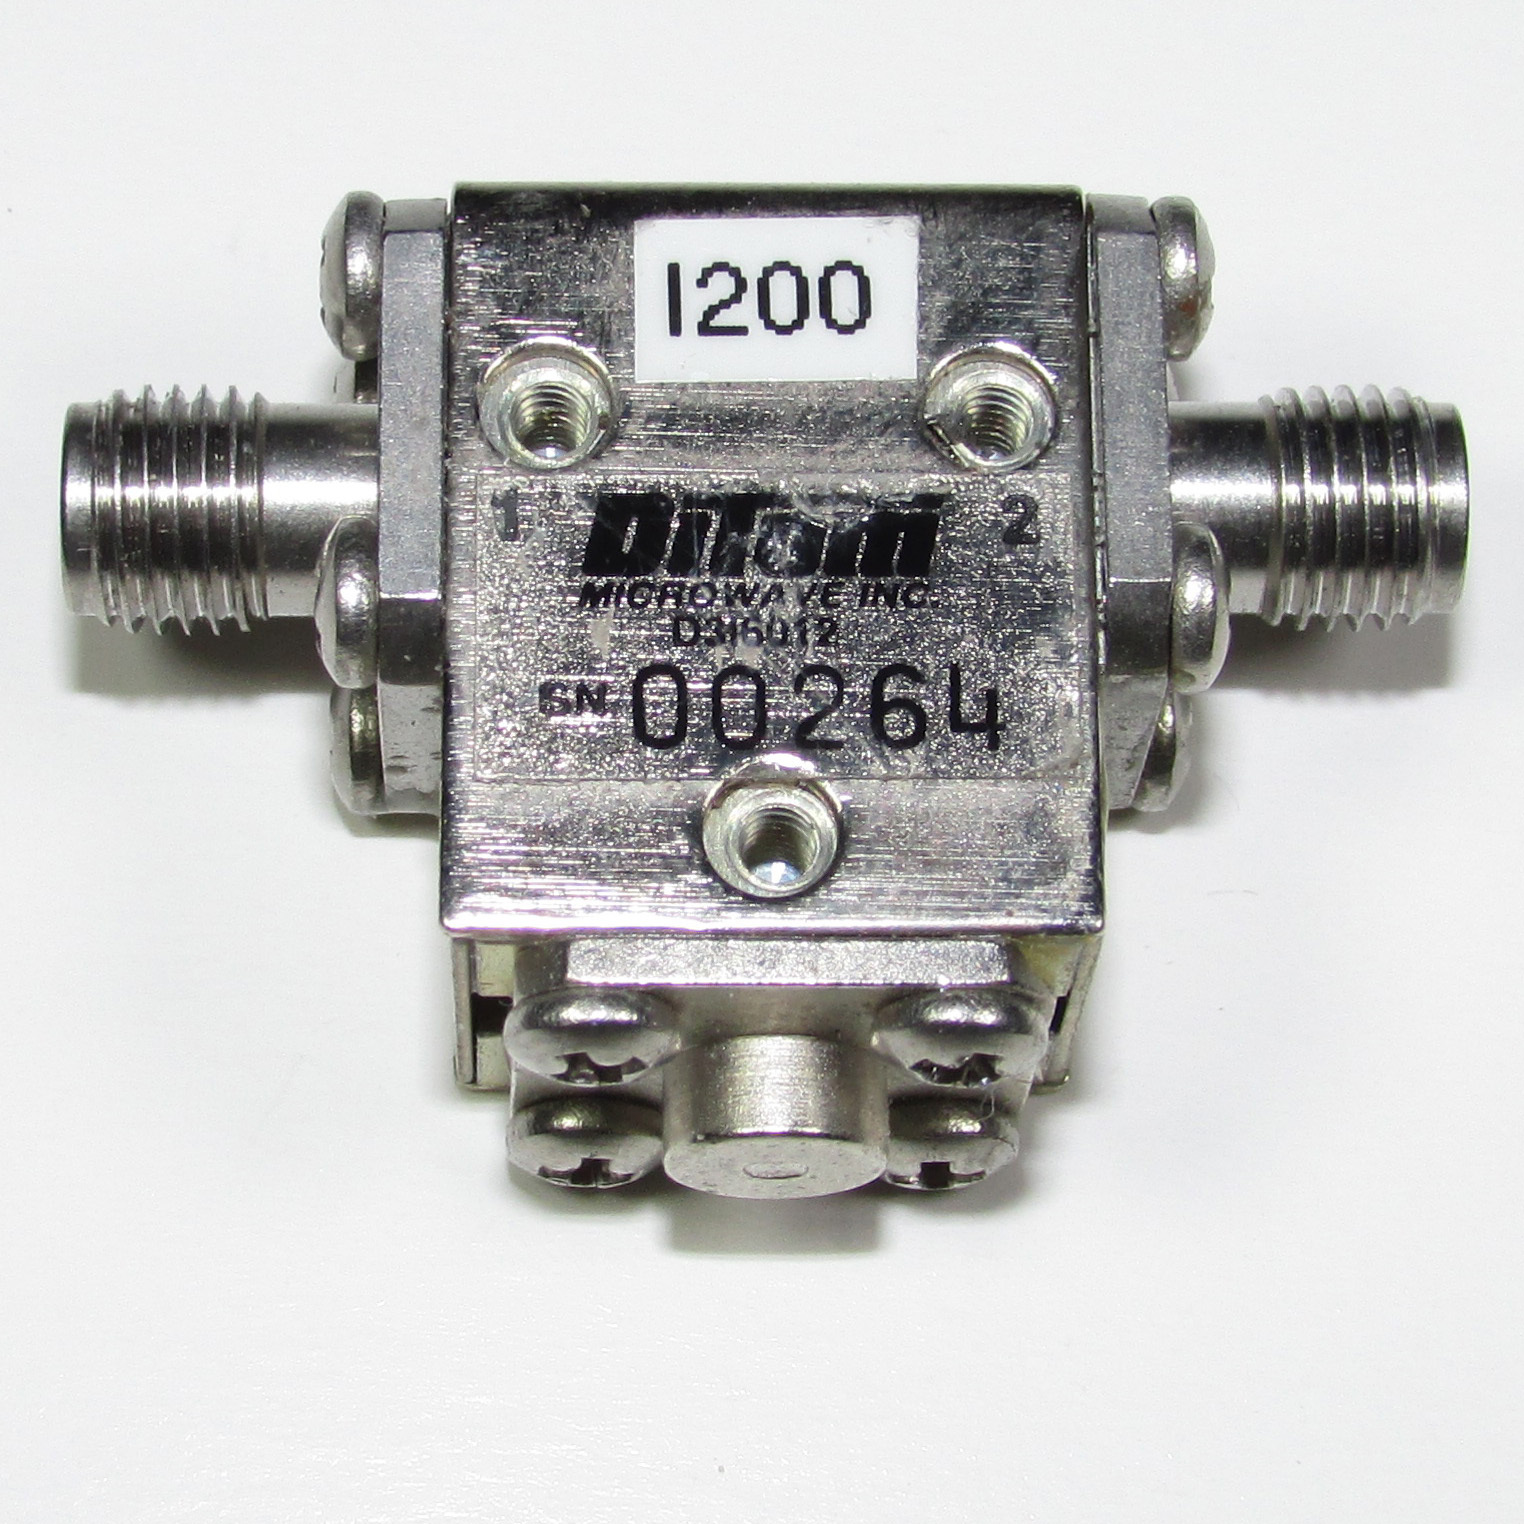 American DITOM D3I6012 6-12.4GHz SMA microwave coaxial isolator